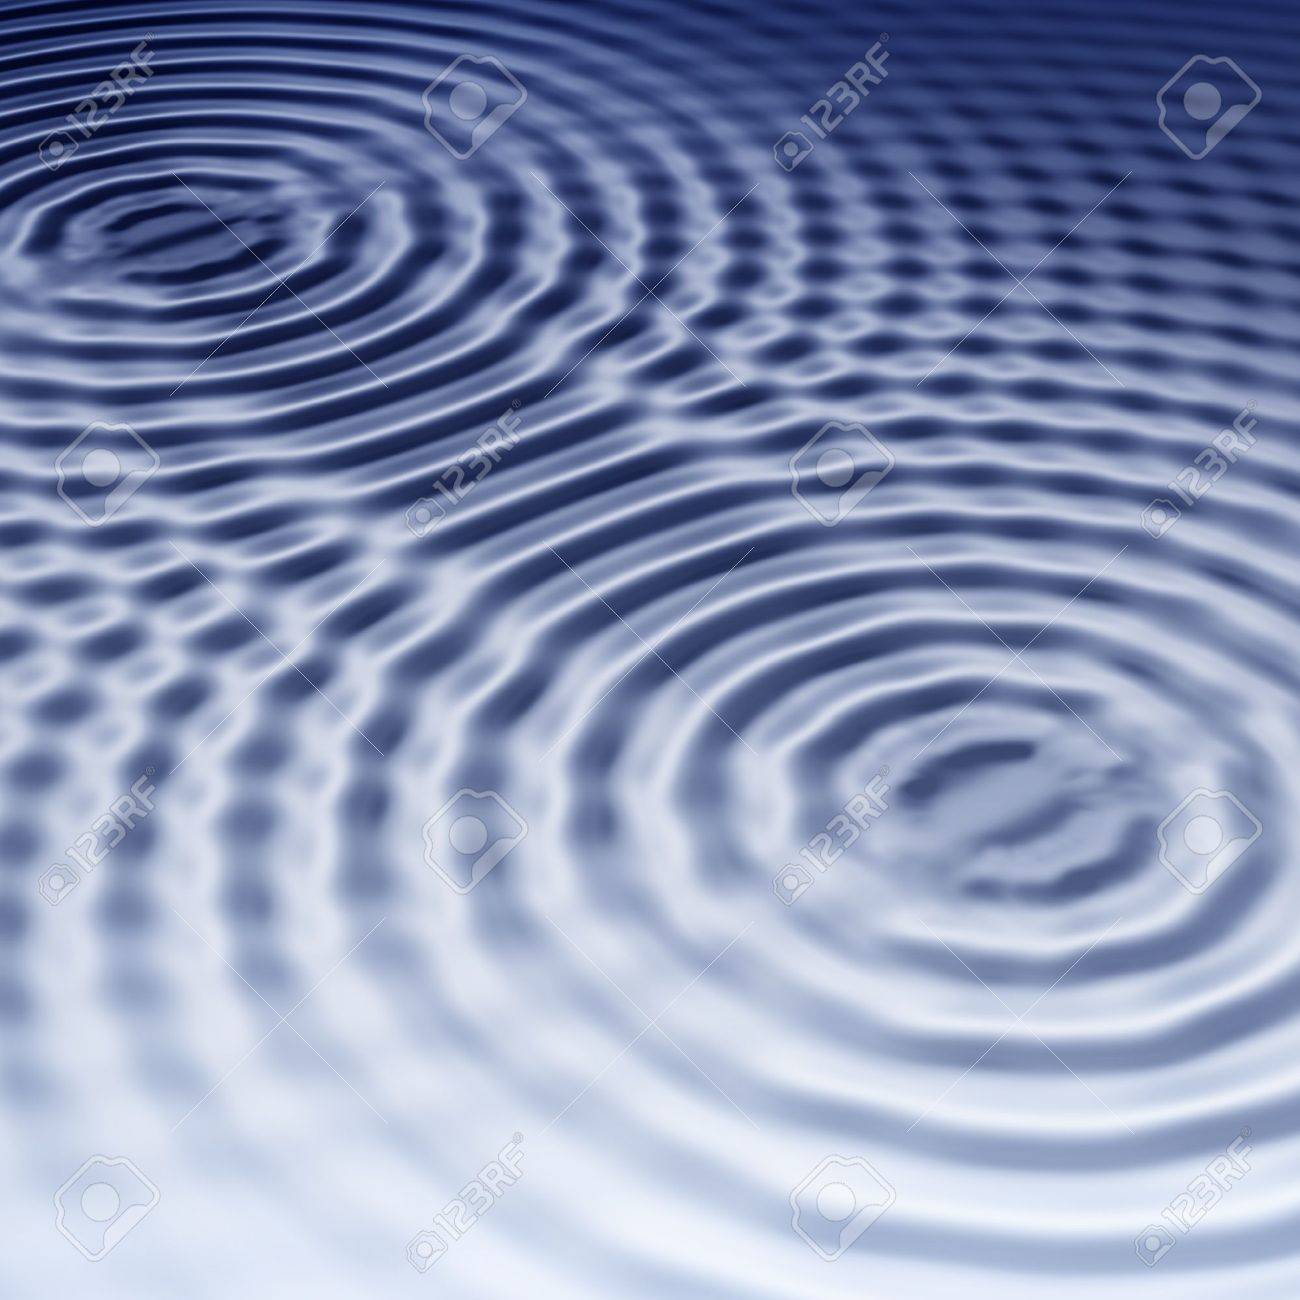 Elegant Blue Ripples Background With Interference Stock Photo